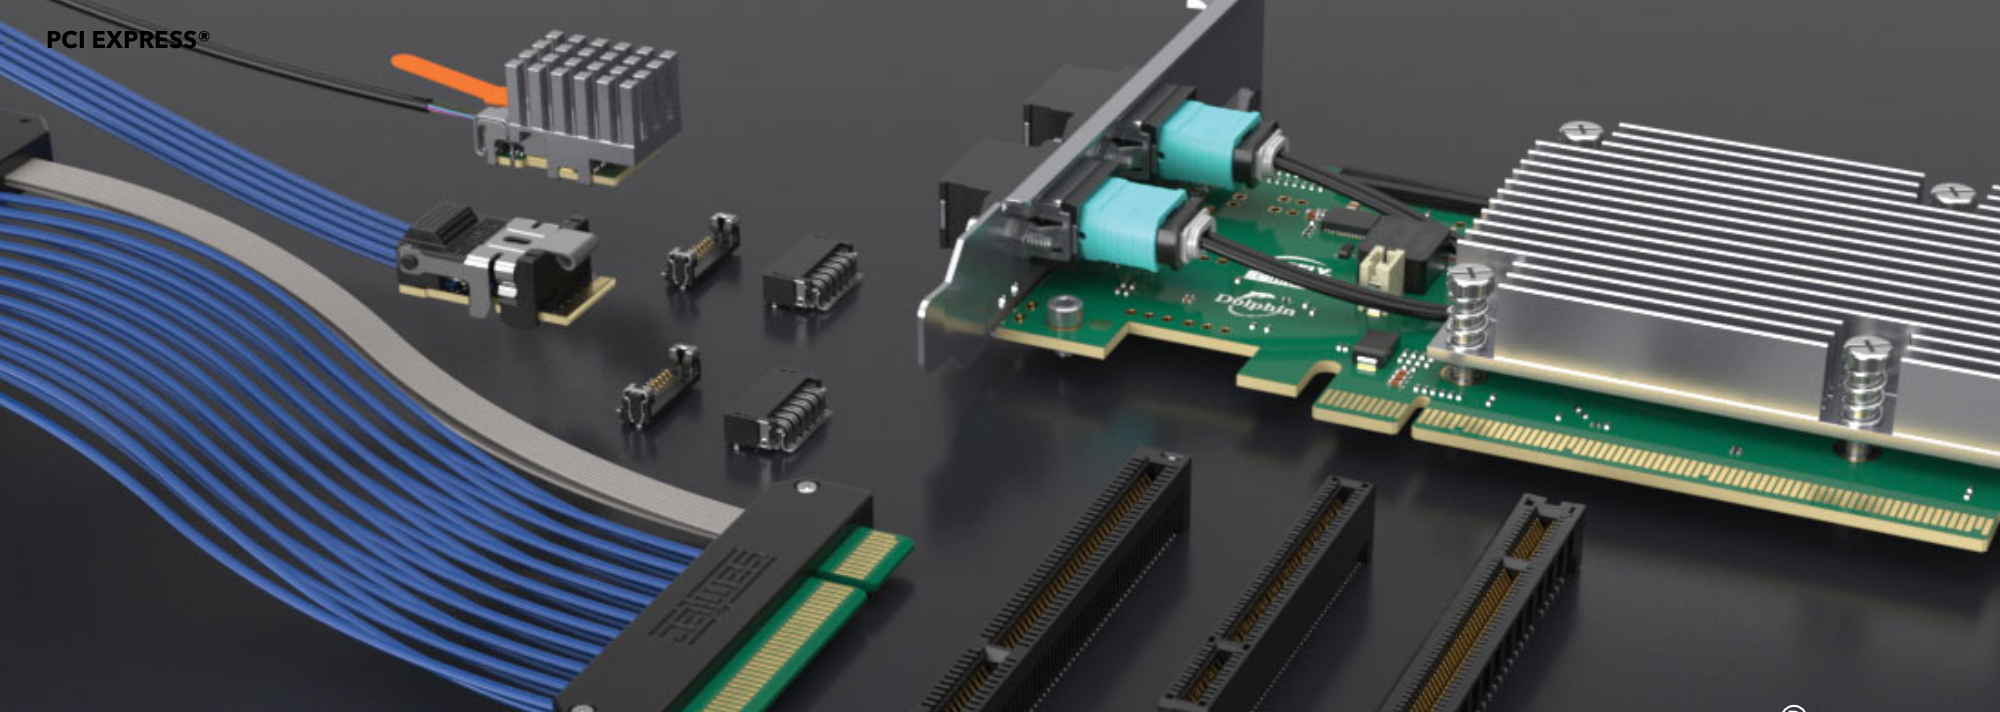 A Look at the PCIe Standard – the Silent Partner of Innovation